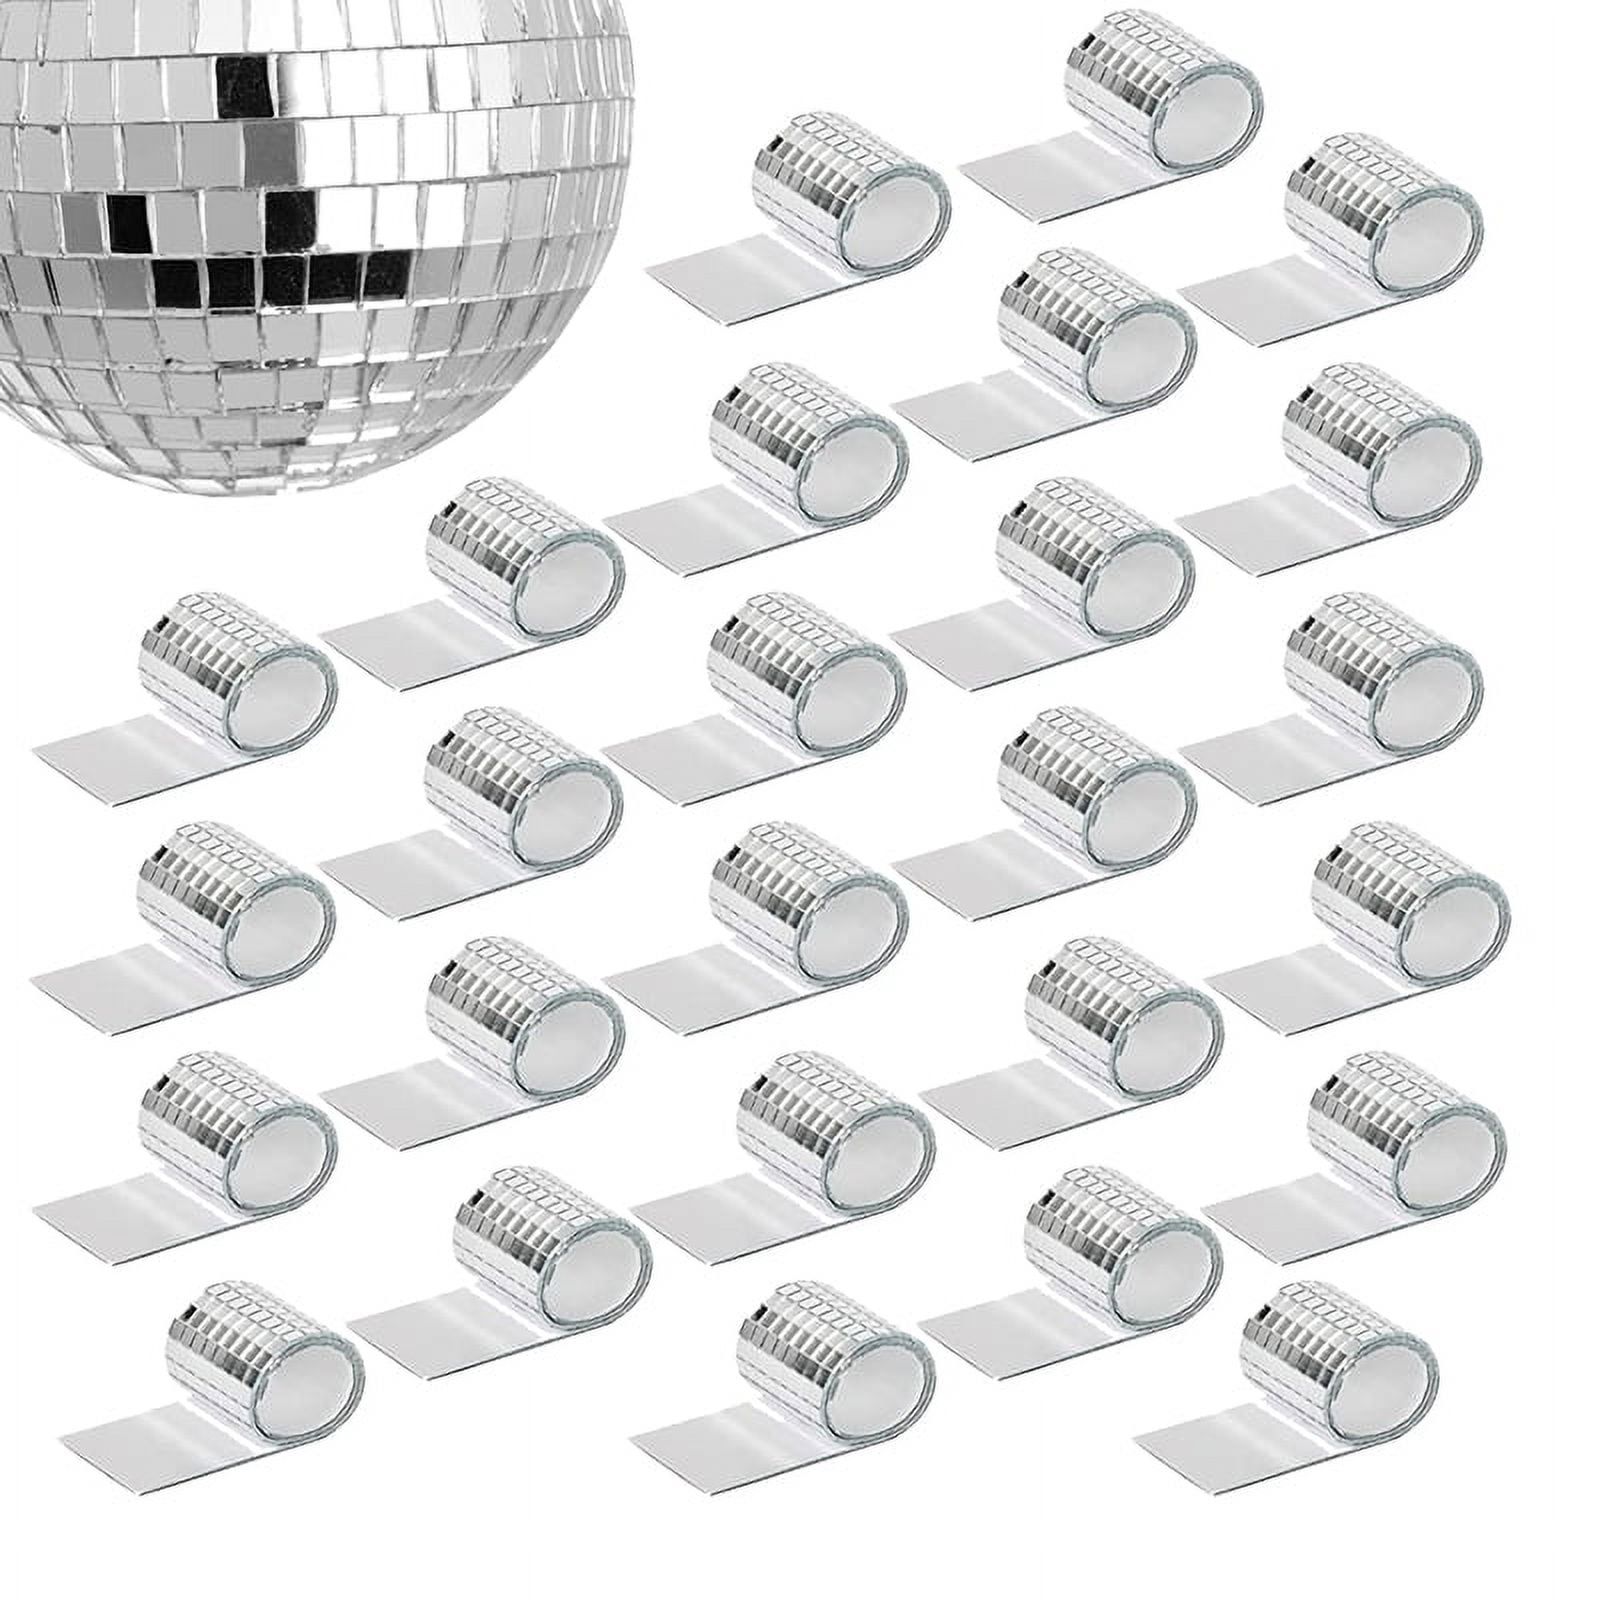  Rcybeo 3000PCS Mosaic Tiles Disco Tiles Self-Adhesive Mirror  Mosaic Stickers 10x10mm, Disco Ball Stickers for Craft, Interior Decoration  Square Glass Tiles Self Adhesive DIY Card Making : Arts, Crafts & Sewing